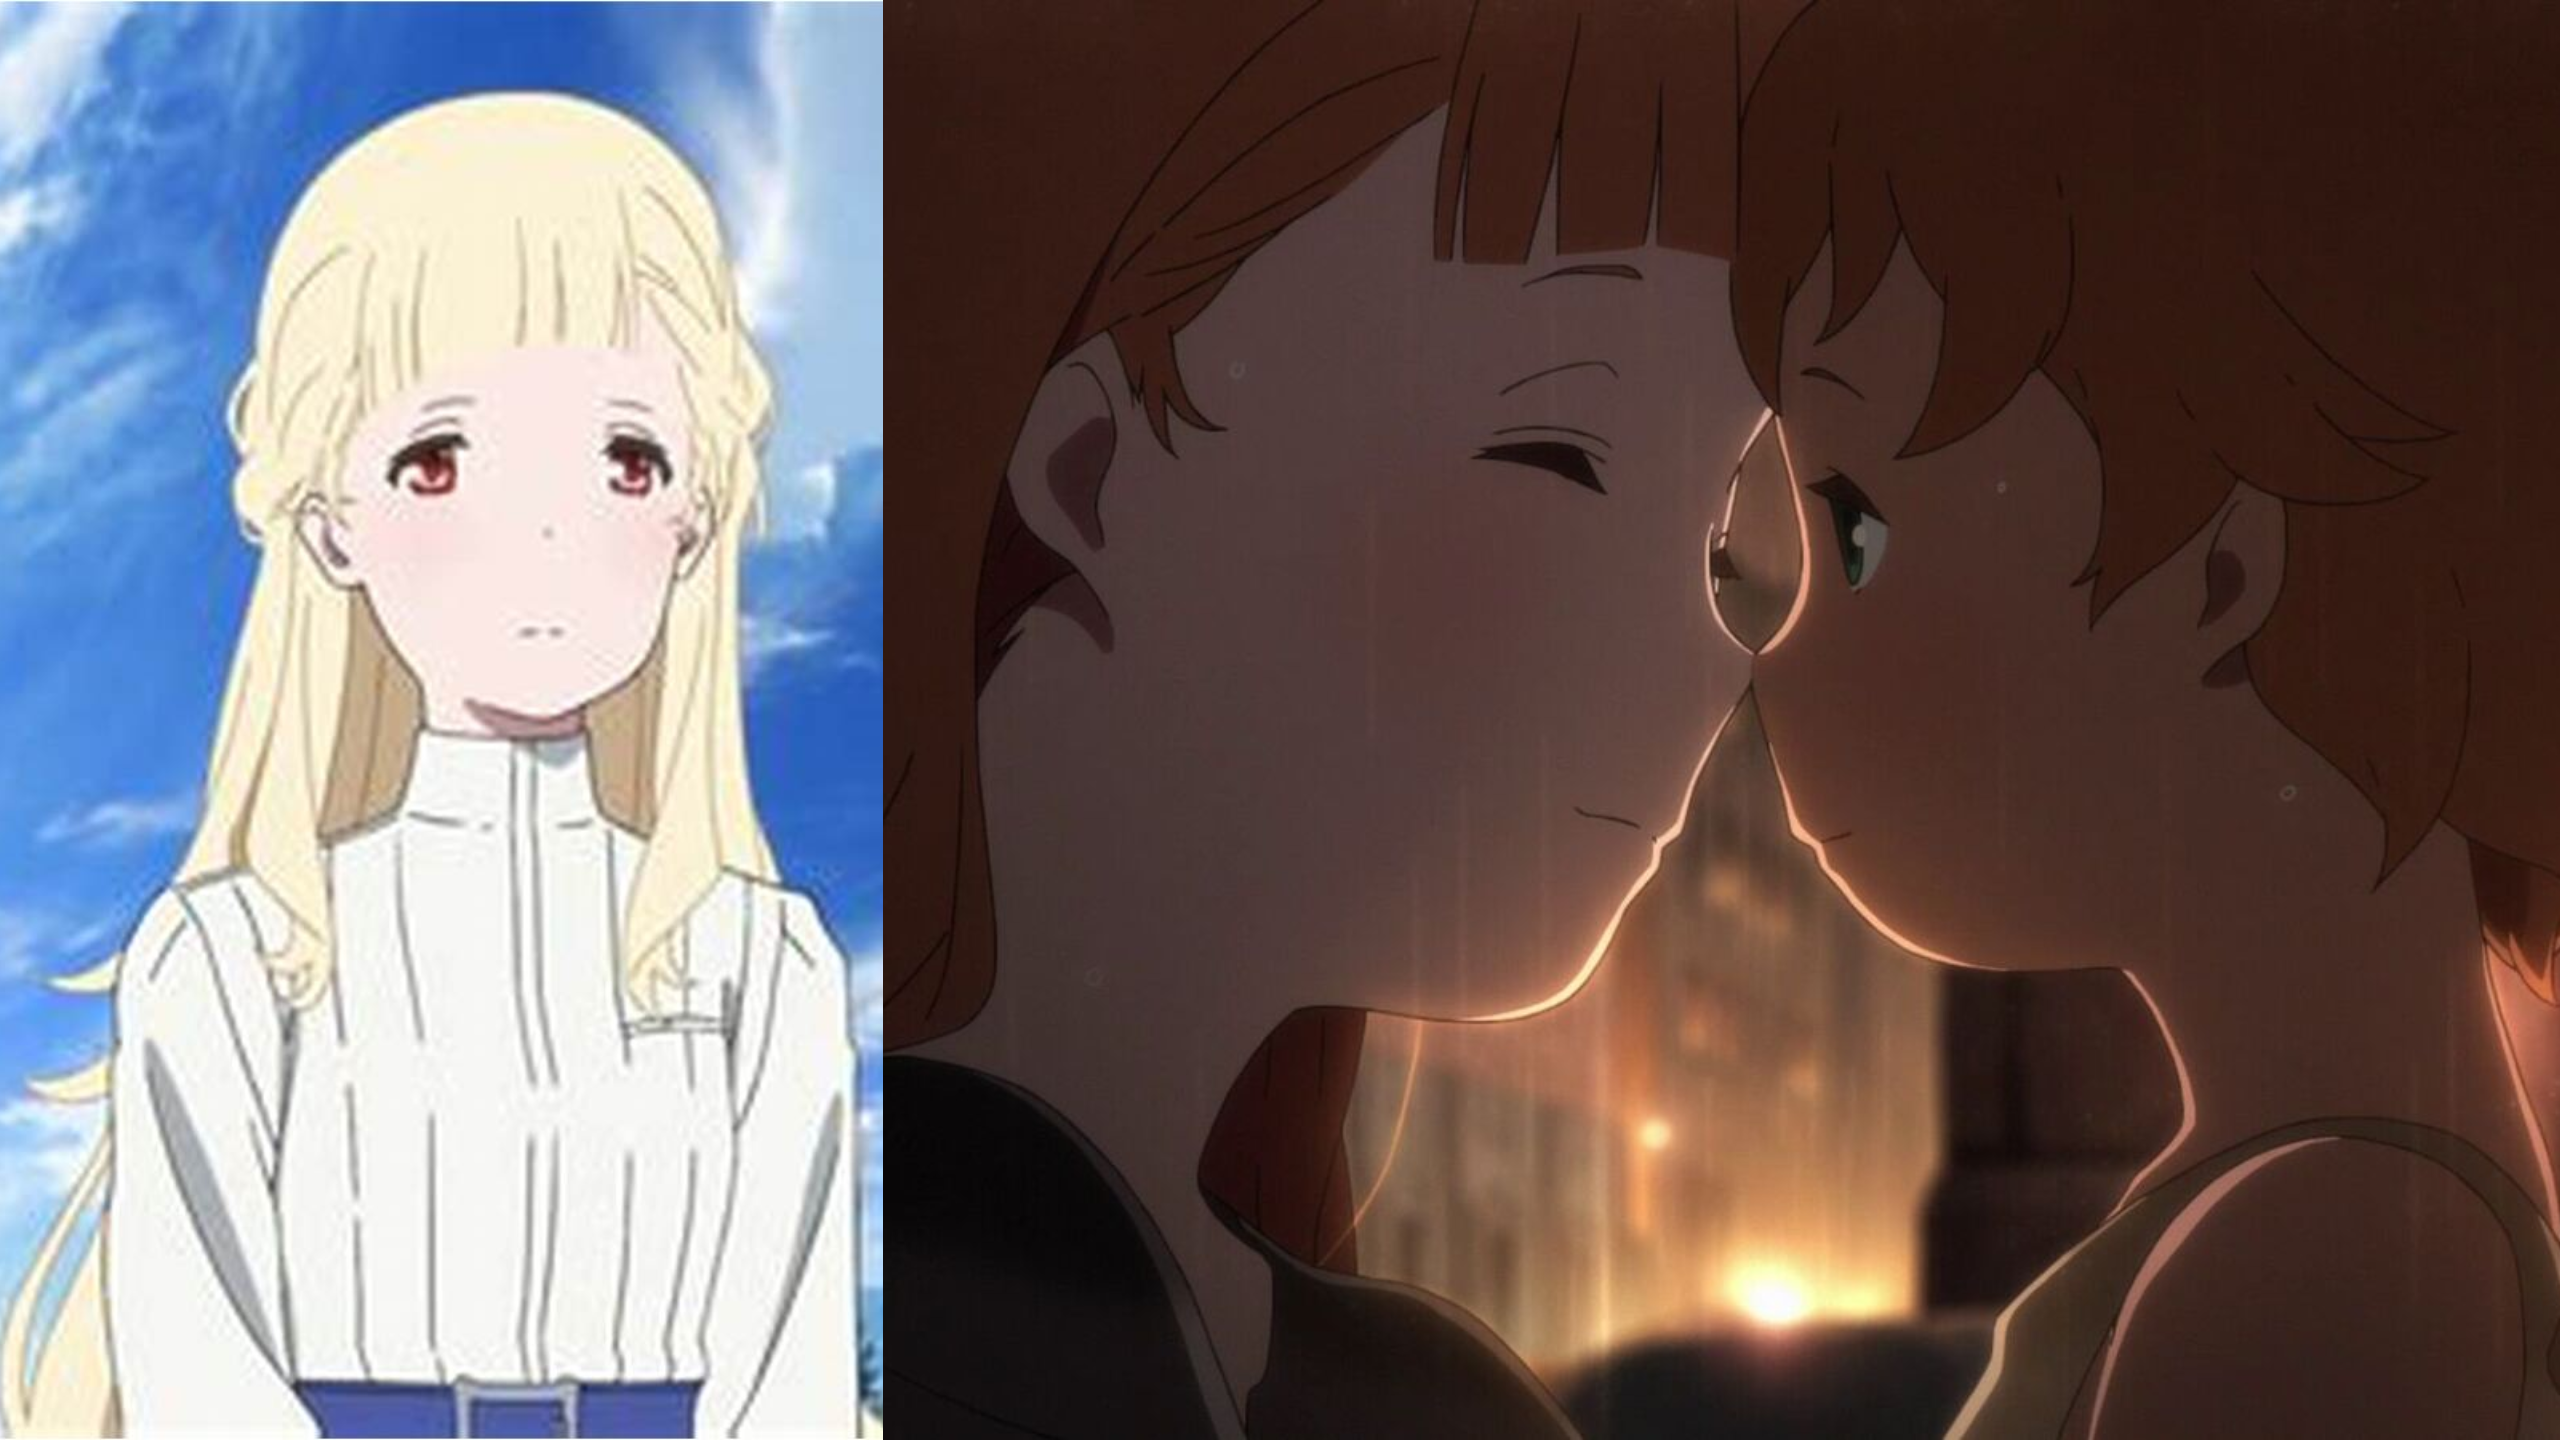 10 Anime Characters Who Need a Heartfelt Romance to Complete Their Stories